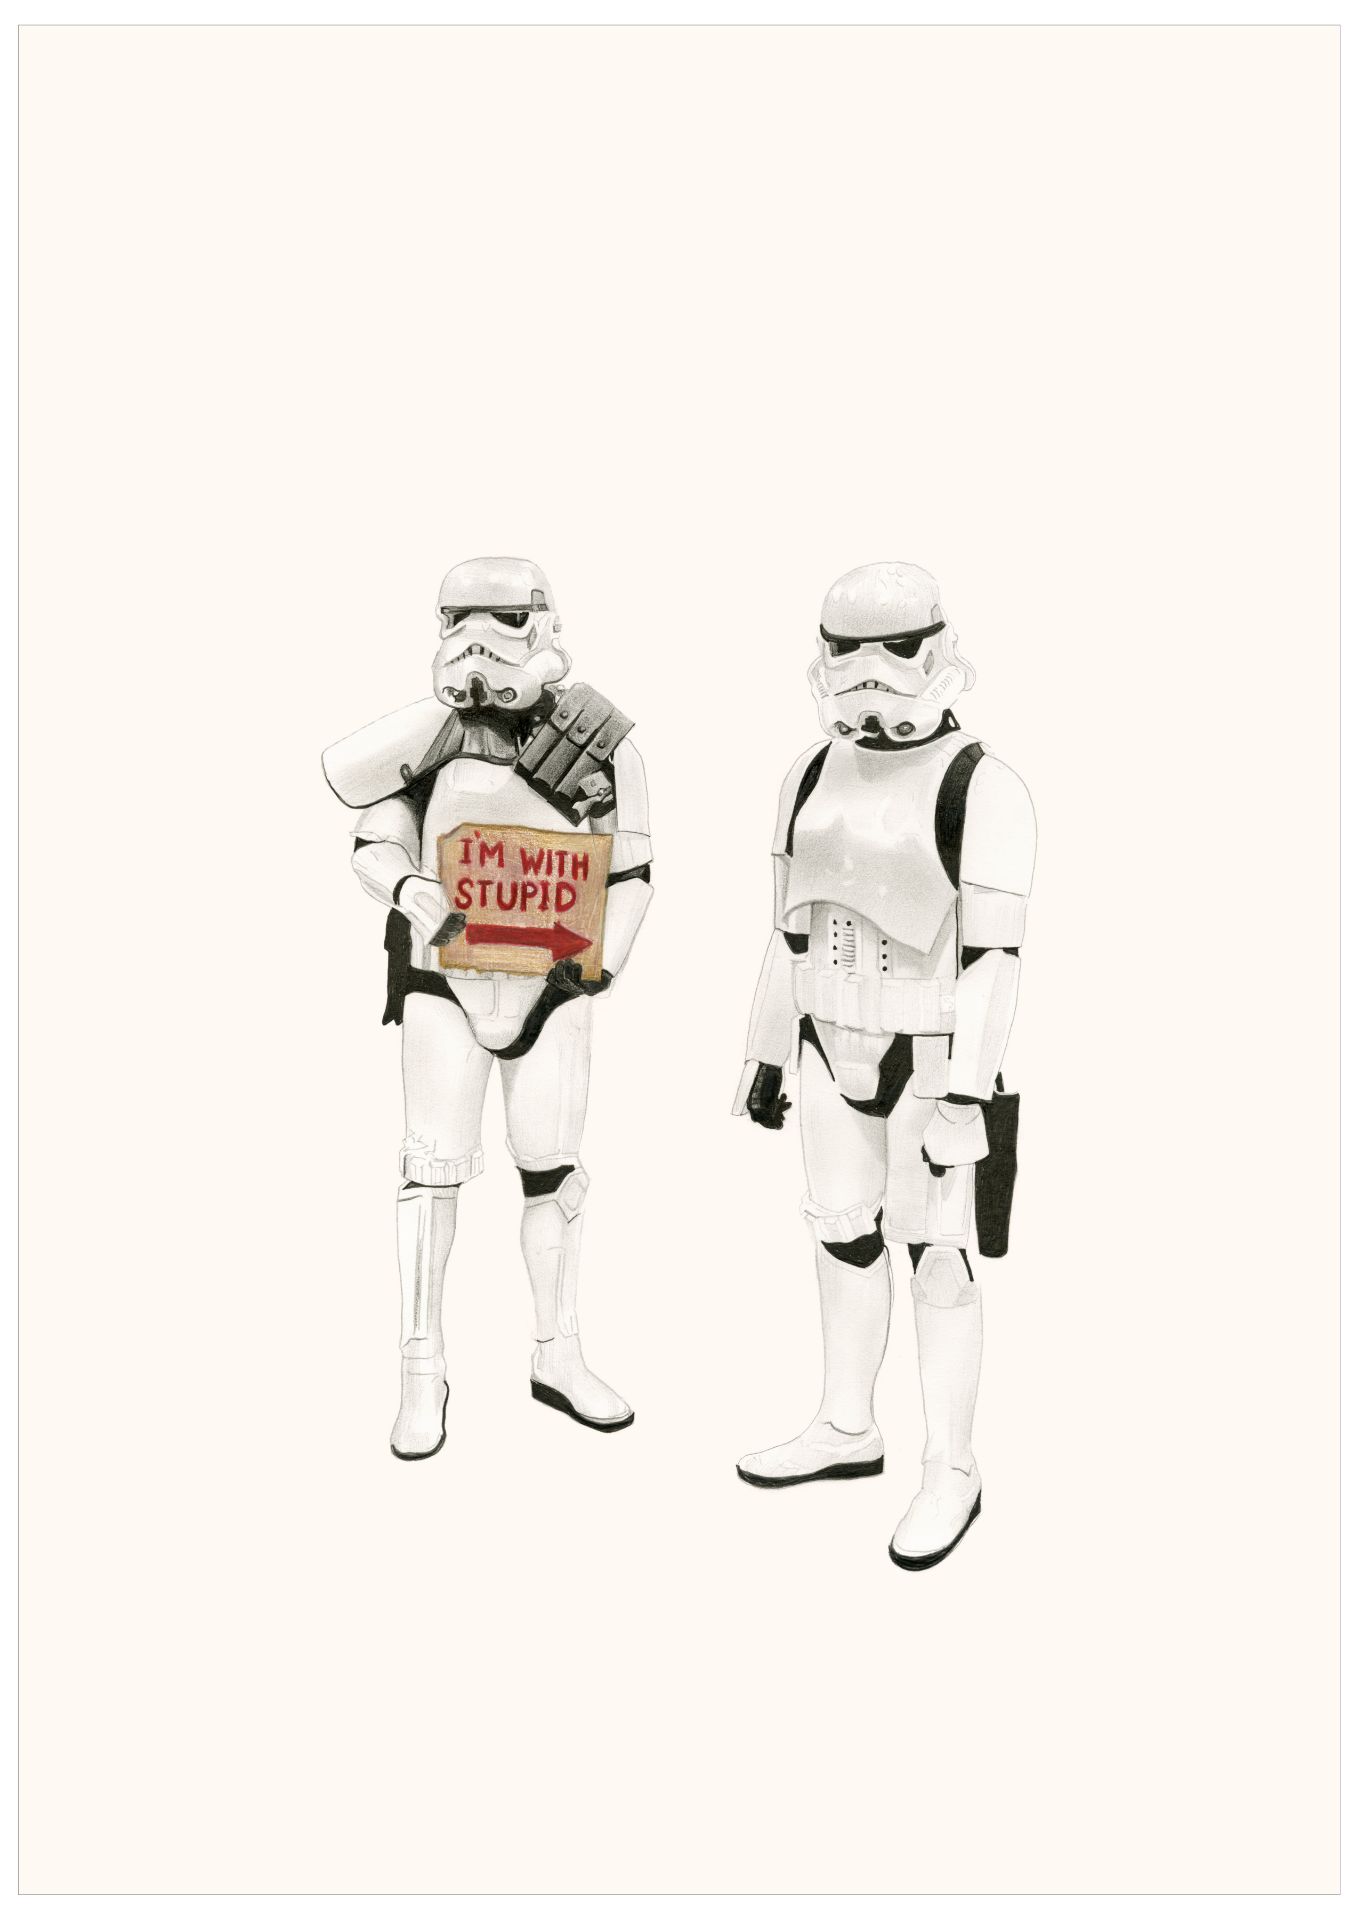 'I'm with Stupid-Stormtroopers'